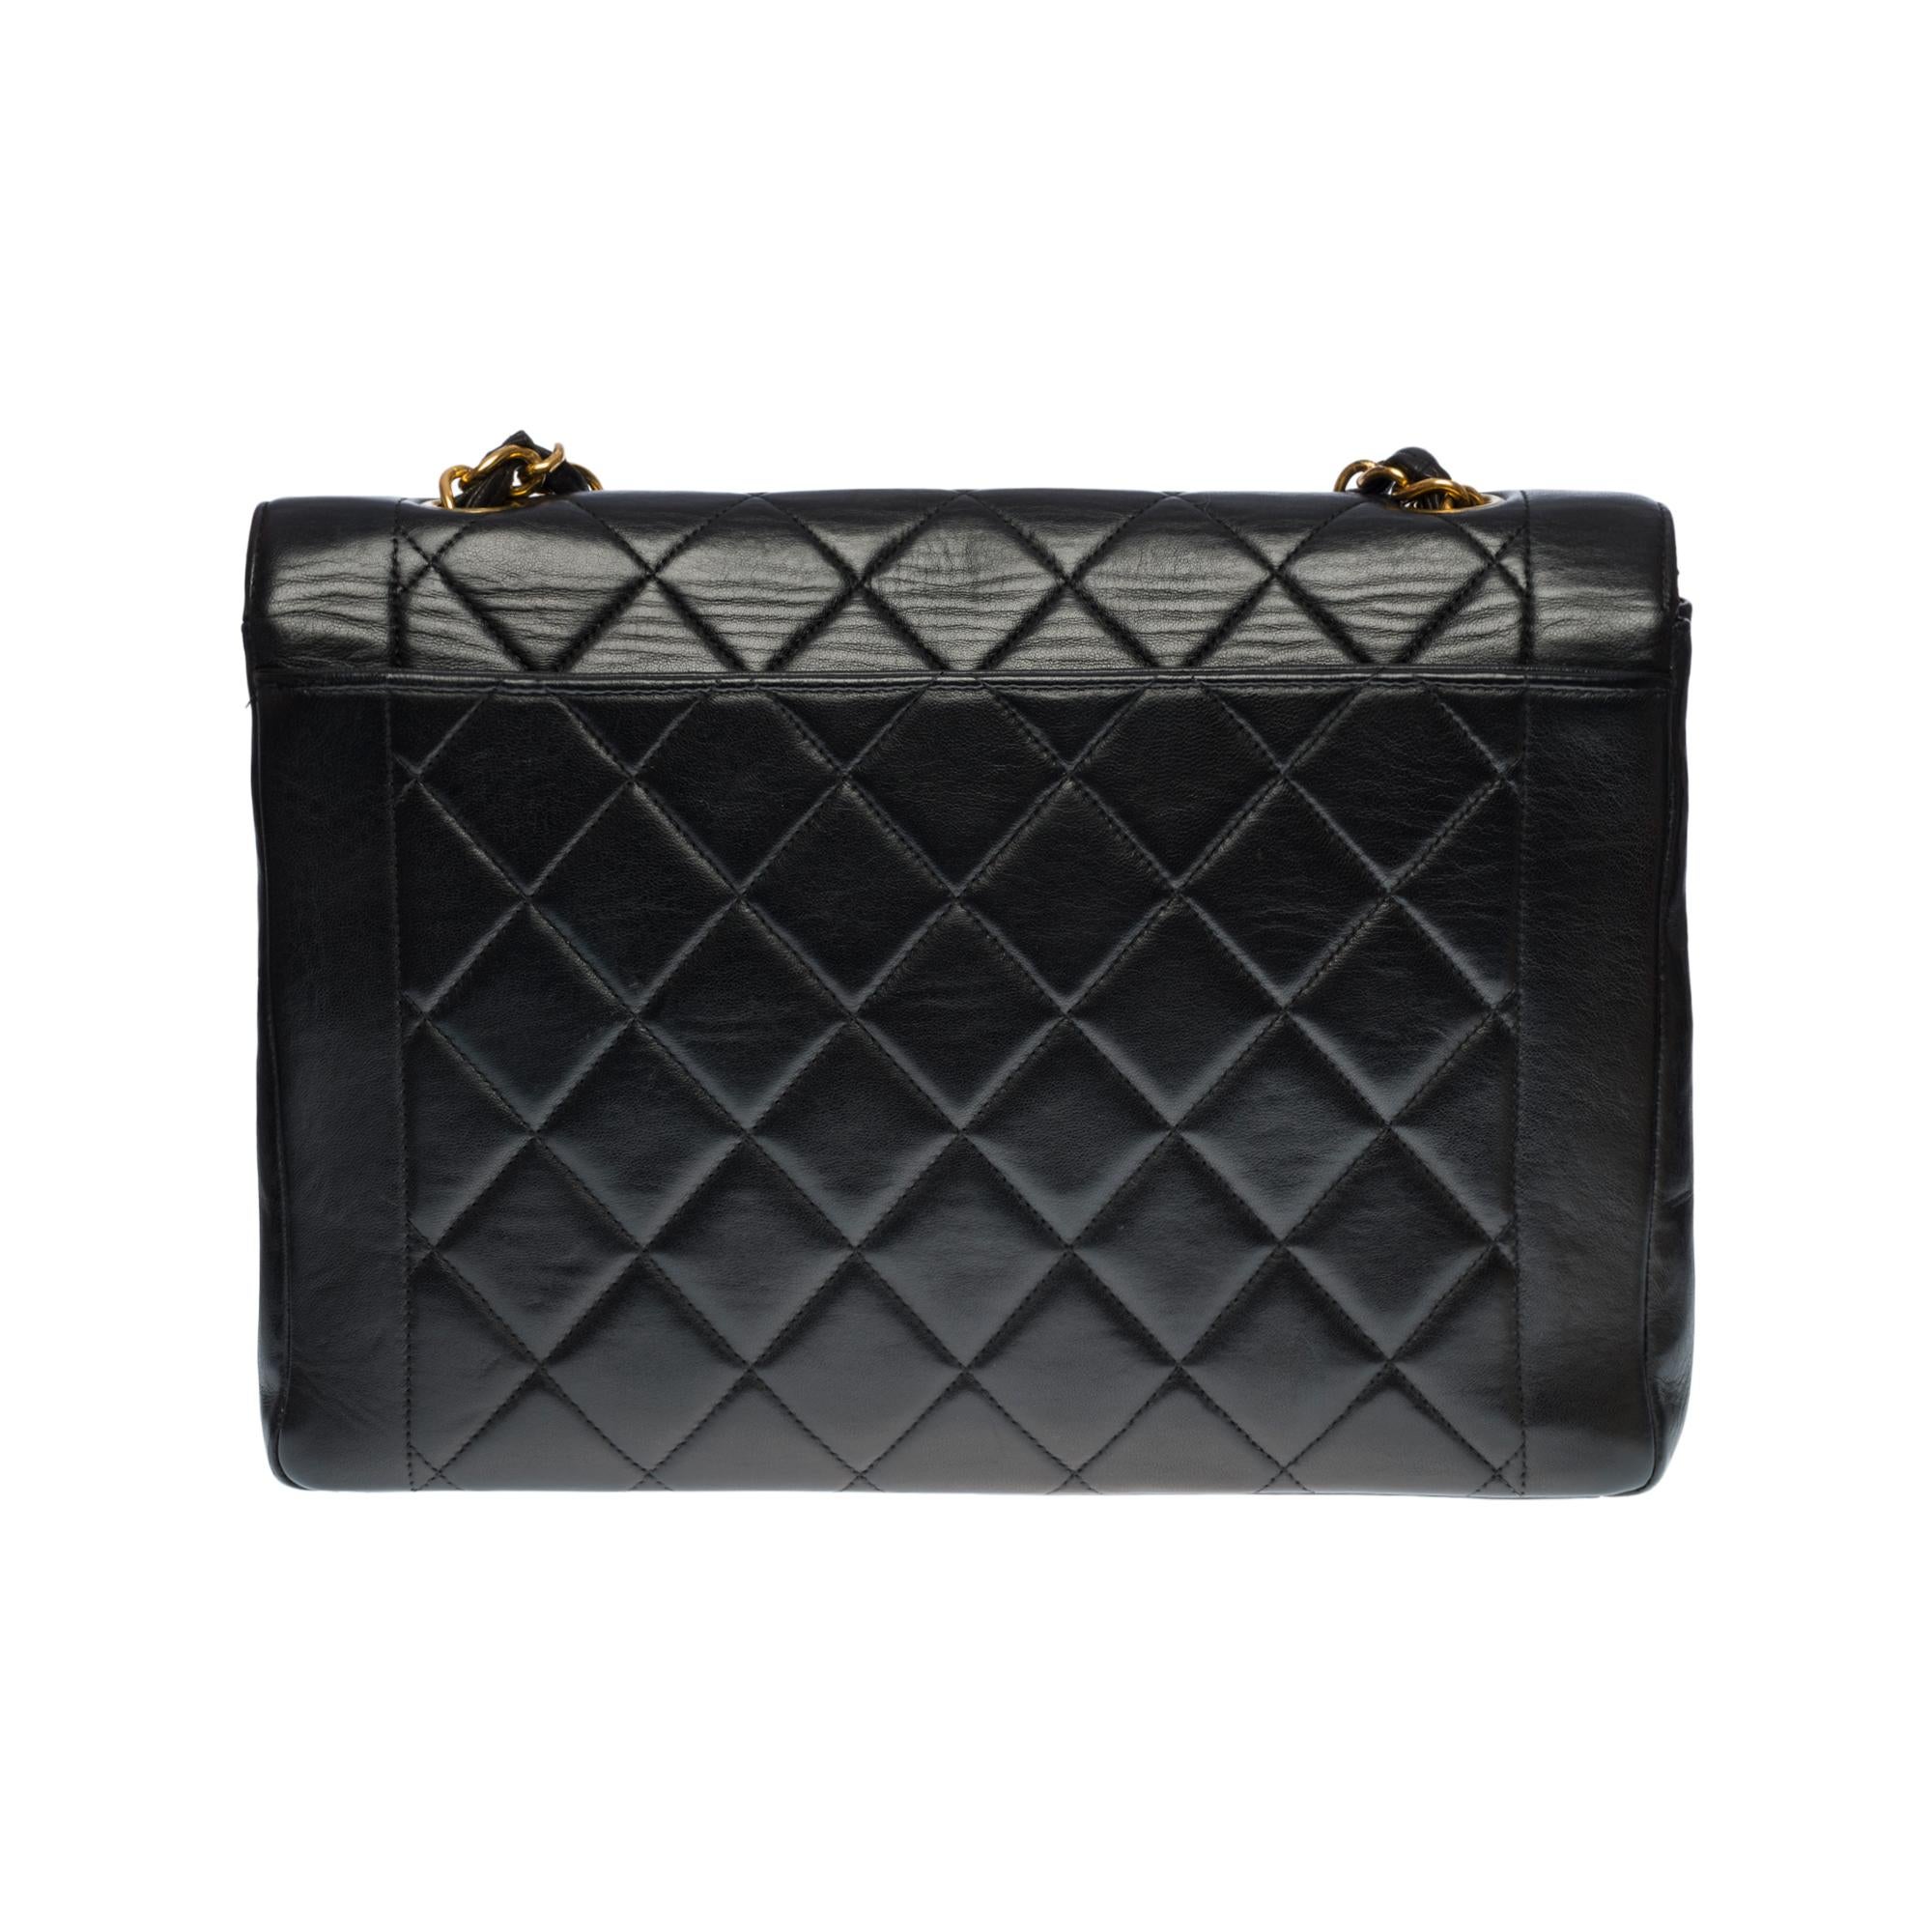 Very chic & Rare Chanel Diana GM shoulder bag in black quilted leather, gold-tone metal hardware, a gold-tone metal chain handle interlaced with black leather for shoulder or crossbody carry

Closure in gilded metal on flap
Burgundy leather lining,